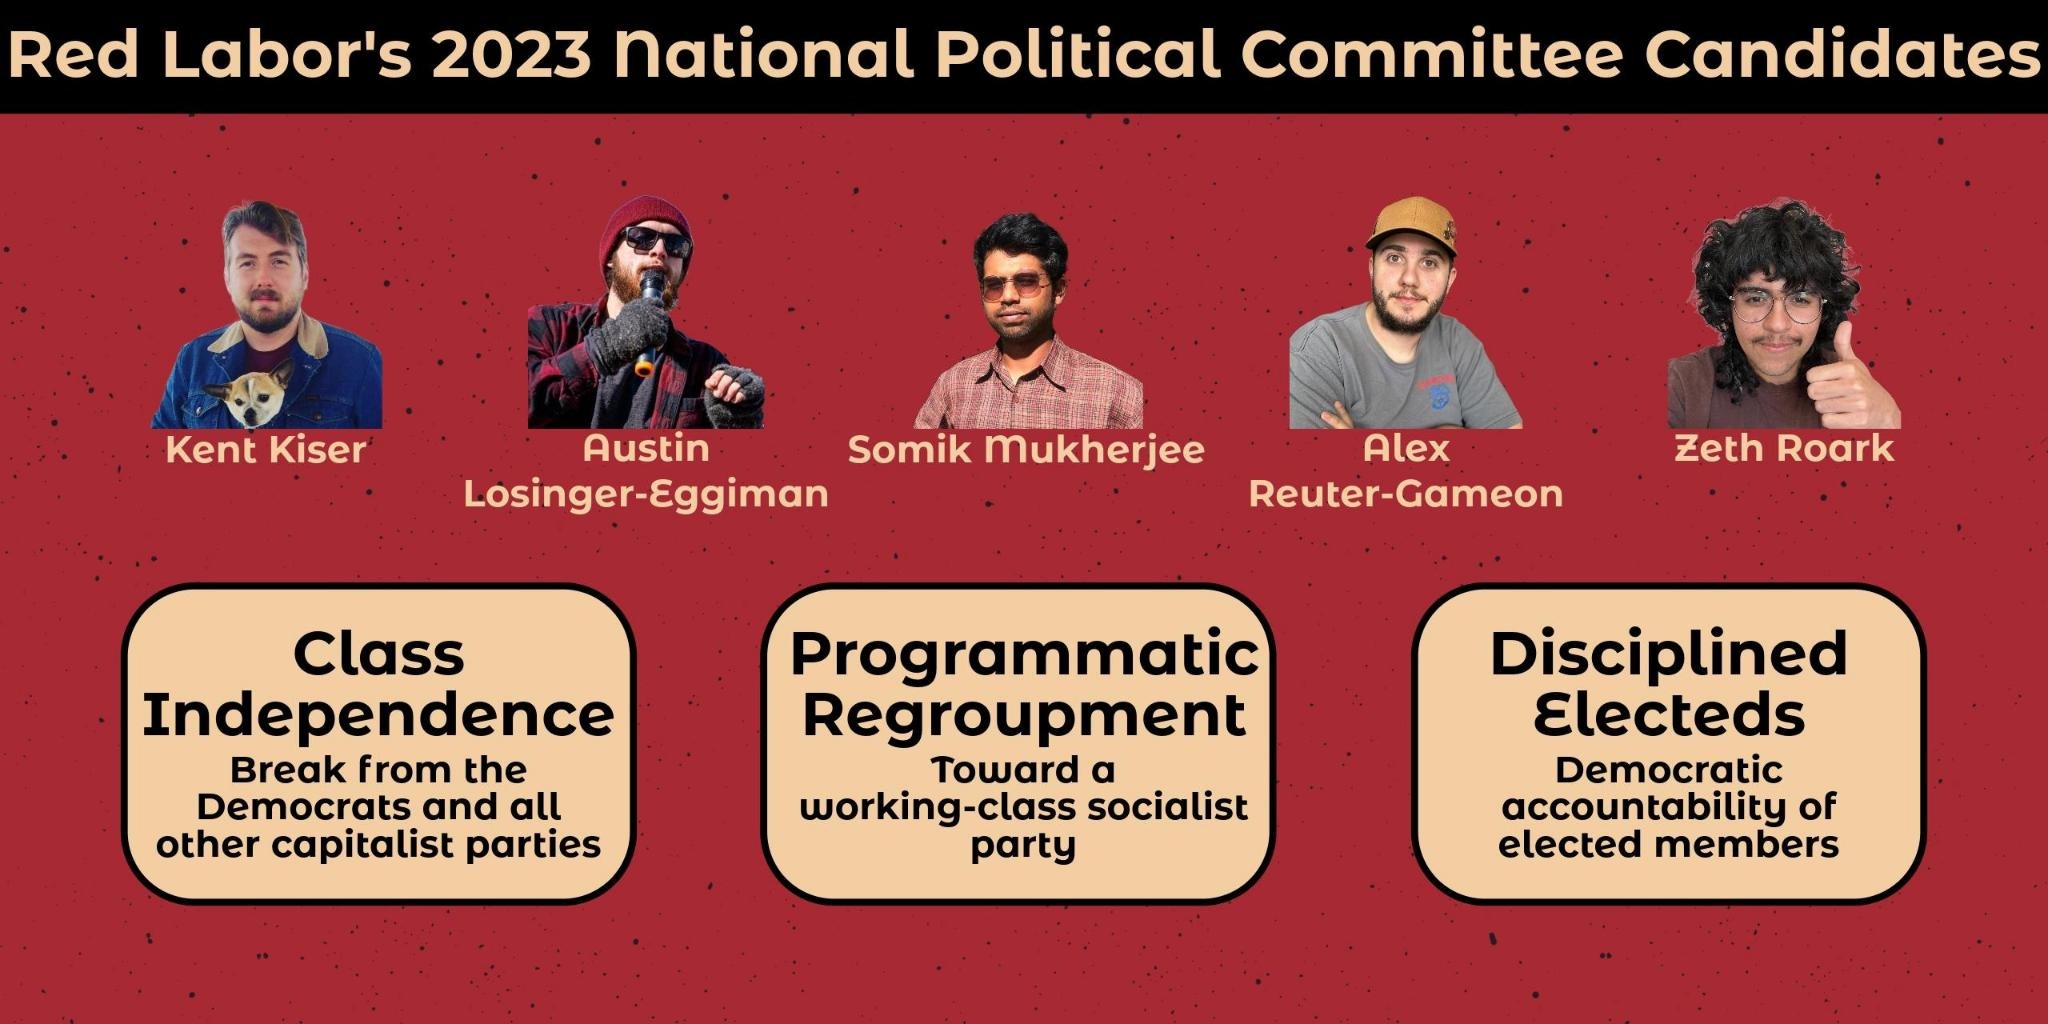 Red Labor Slate members running for NPC election in DSA 2023.